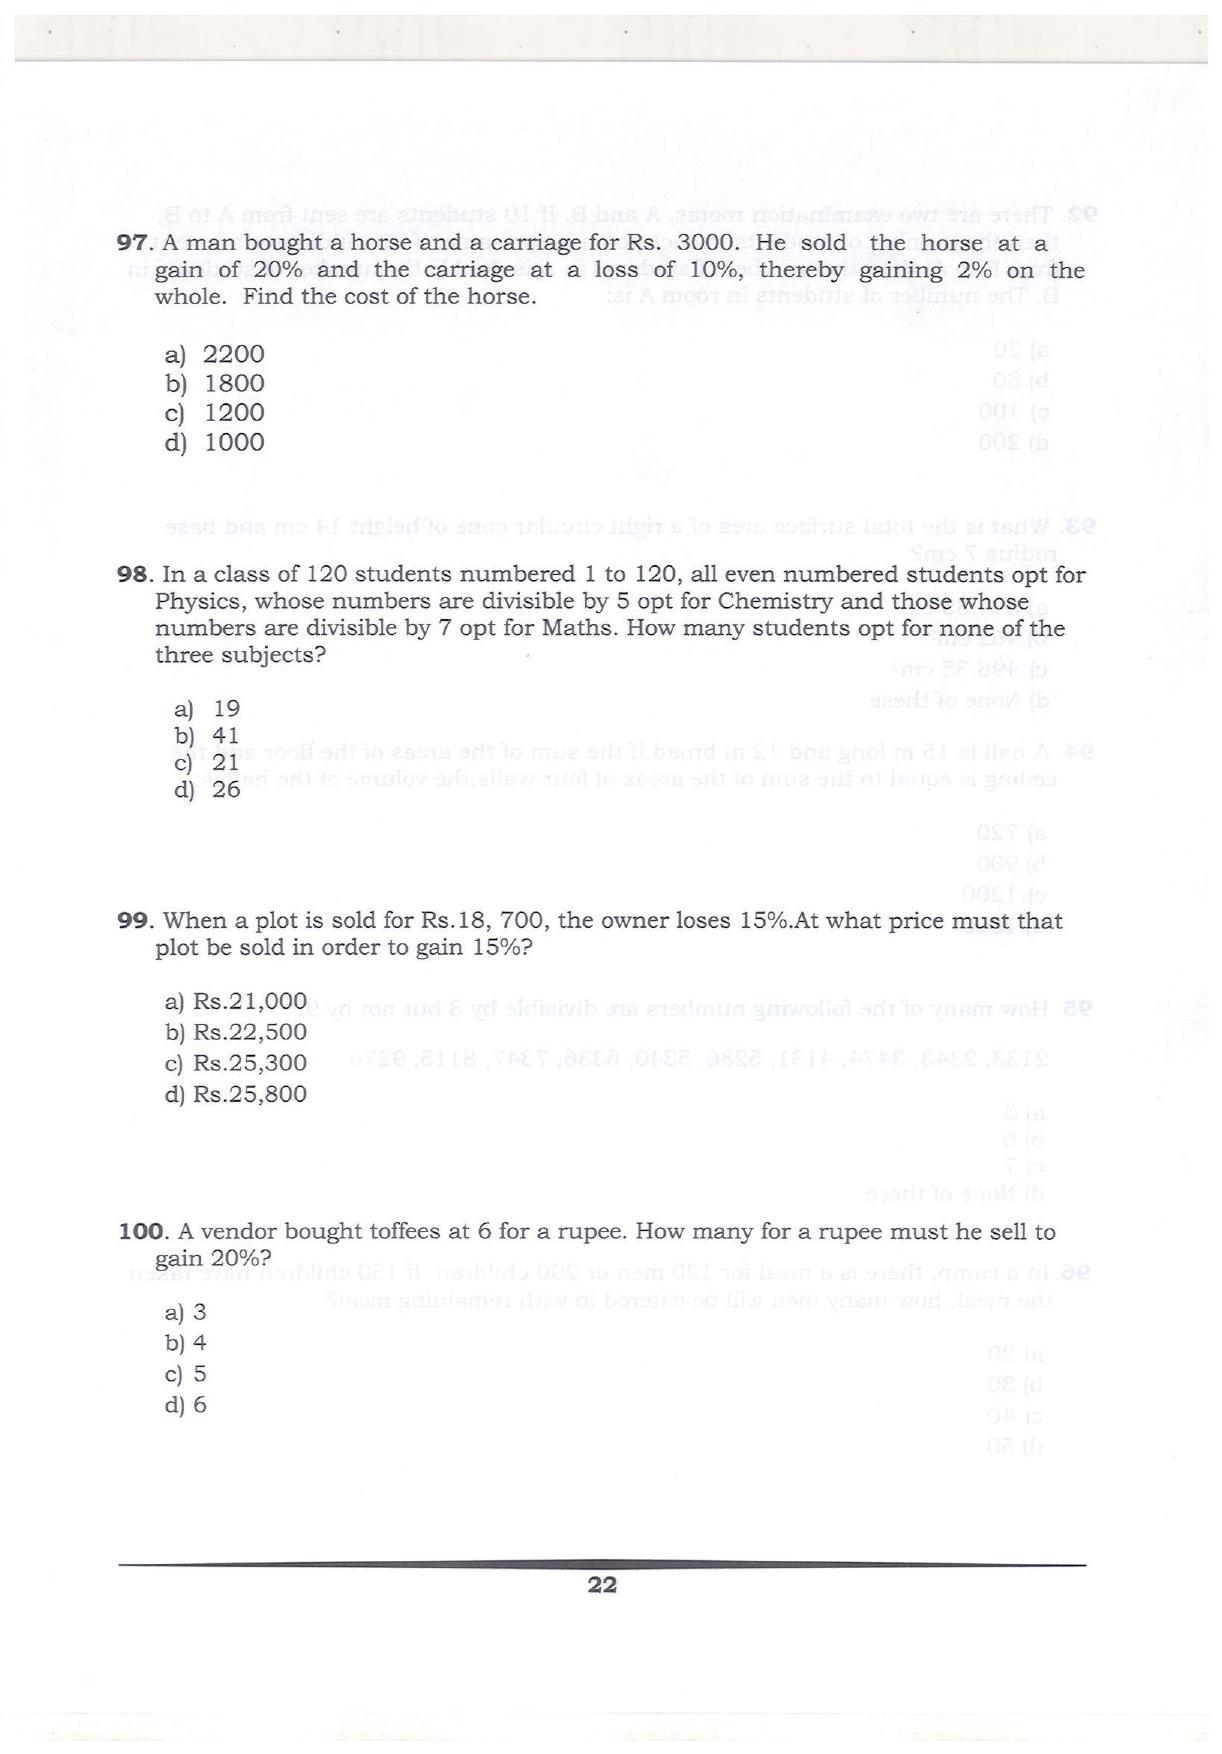 KMAT Question Papers - February 2018 - Page 21